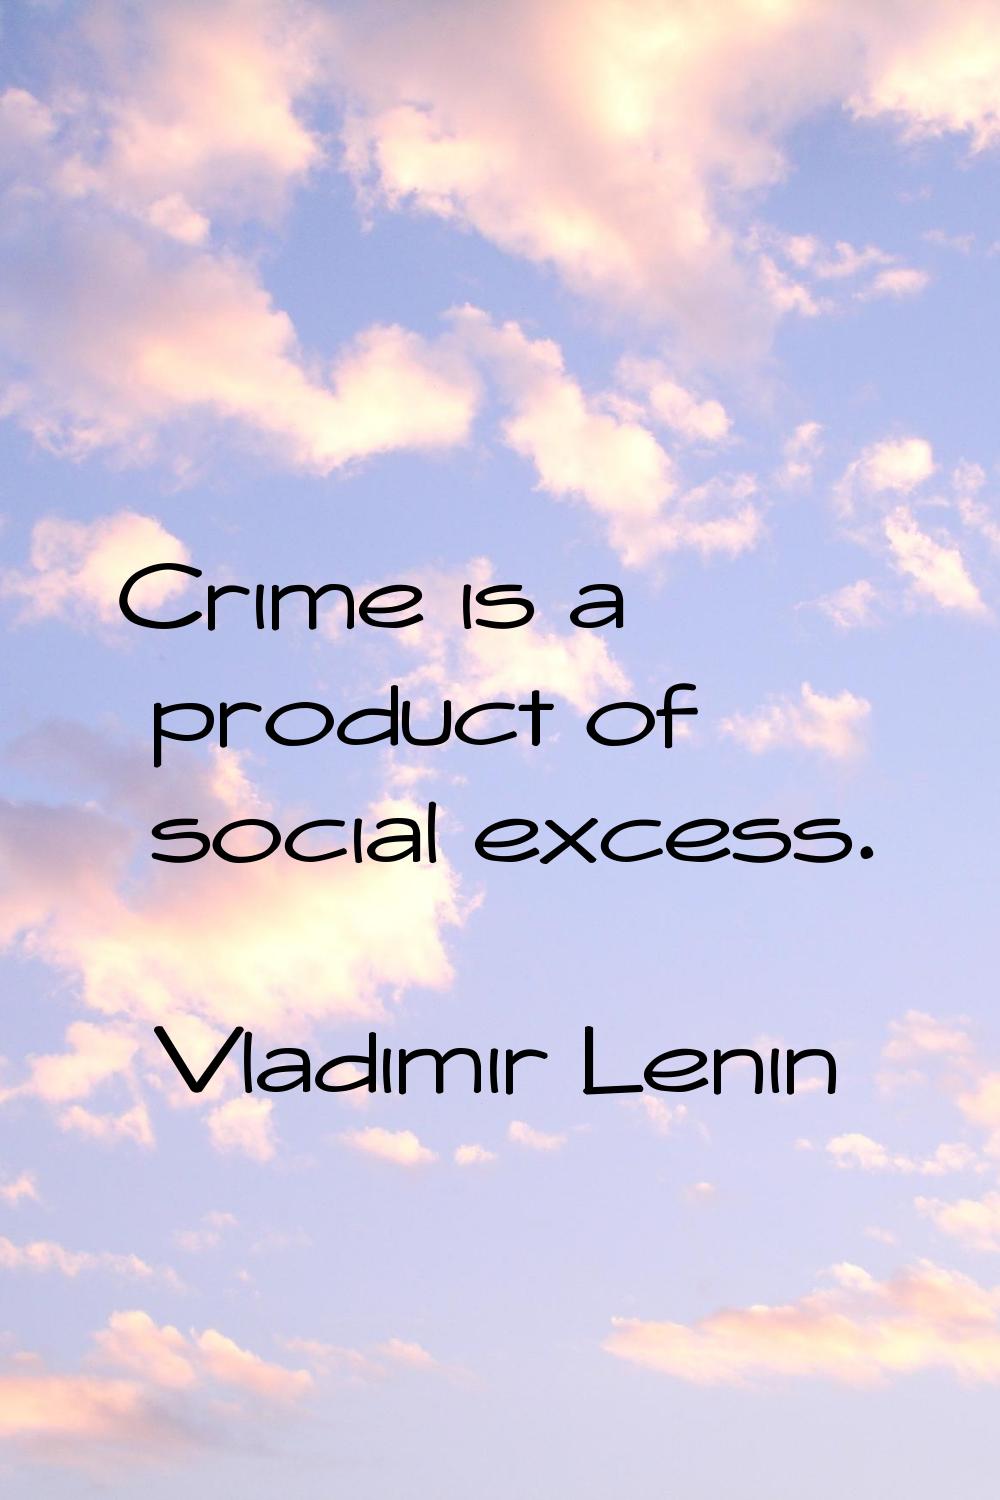 Crime is a product of social excess.